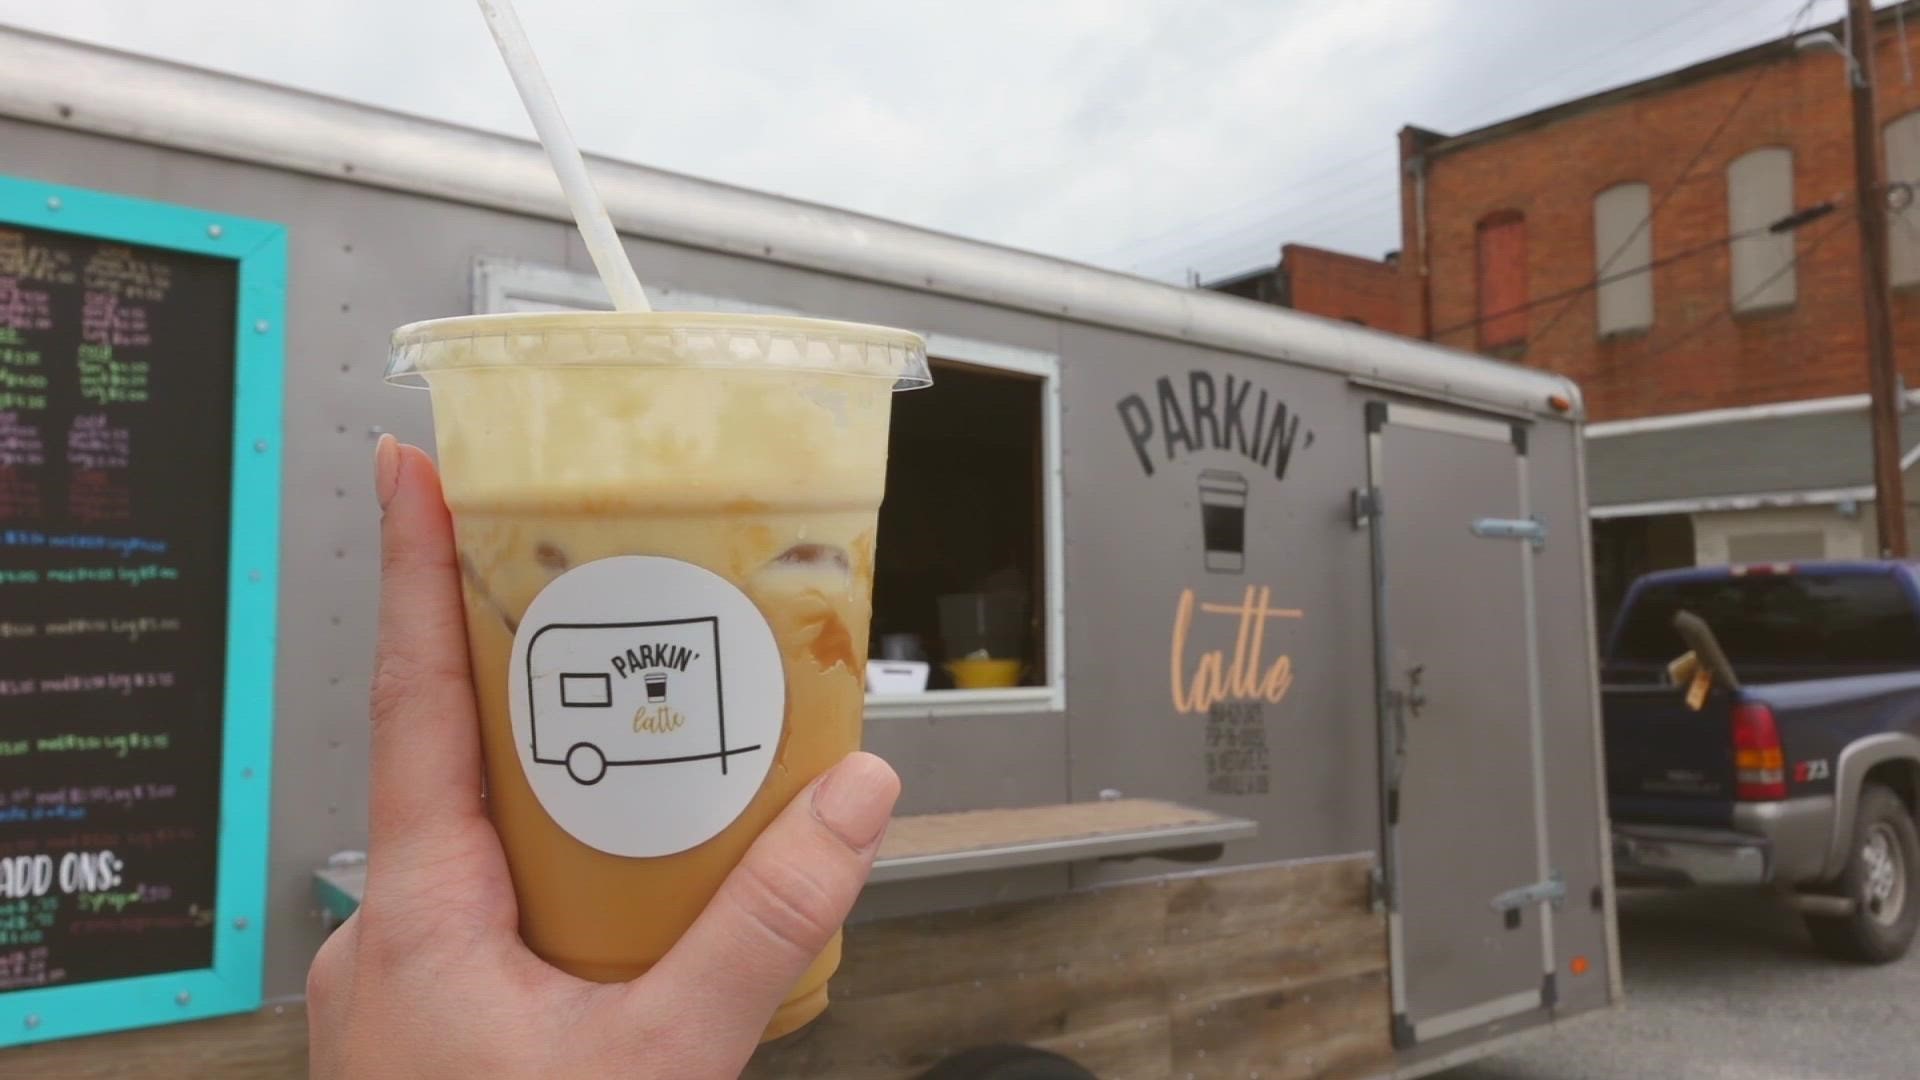 Parkin' Latte owner Briana Harris says the trailer travels around town during the week serving up everything from cold brew to espresso to flavored lemonades